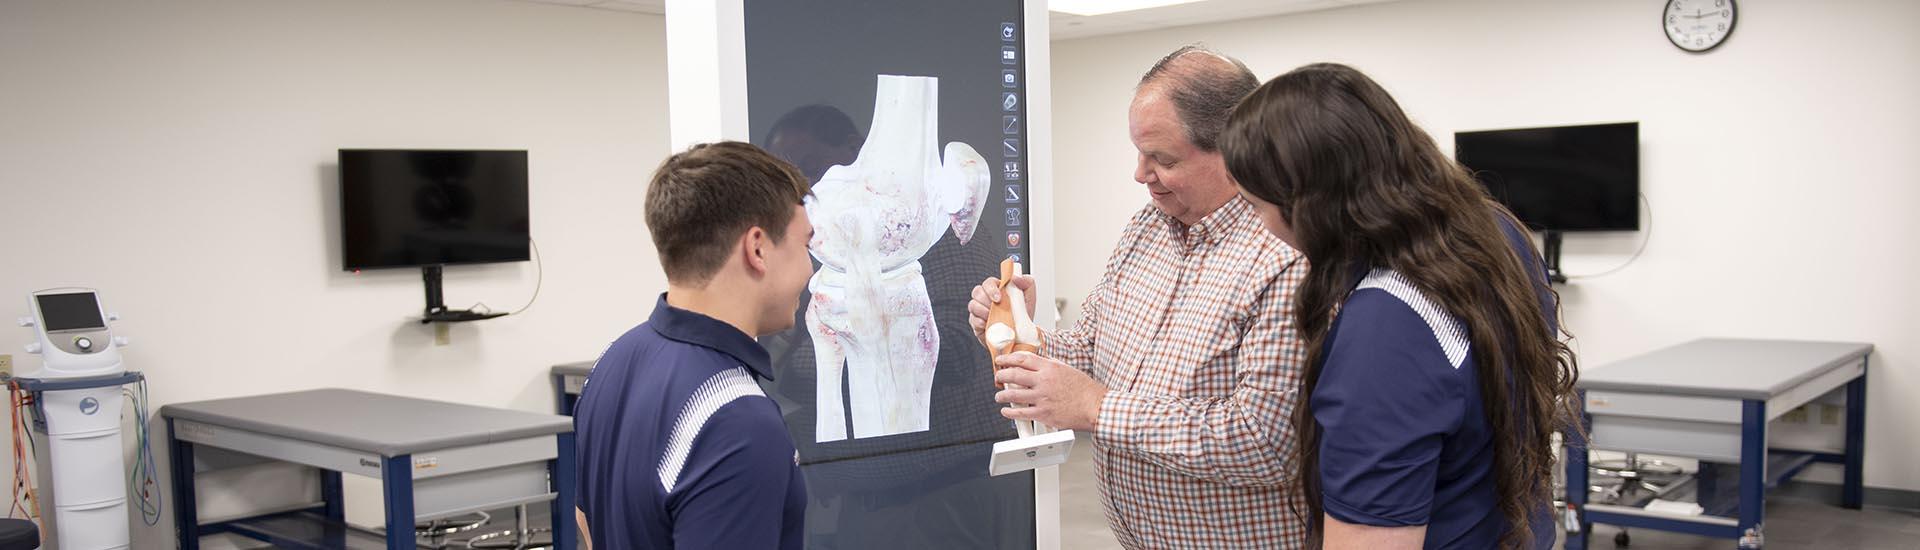 Professor with two athletic training students examining human knee joint models in a lab.